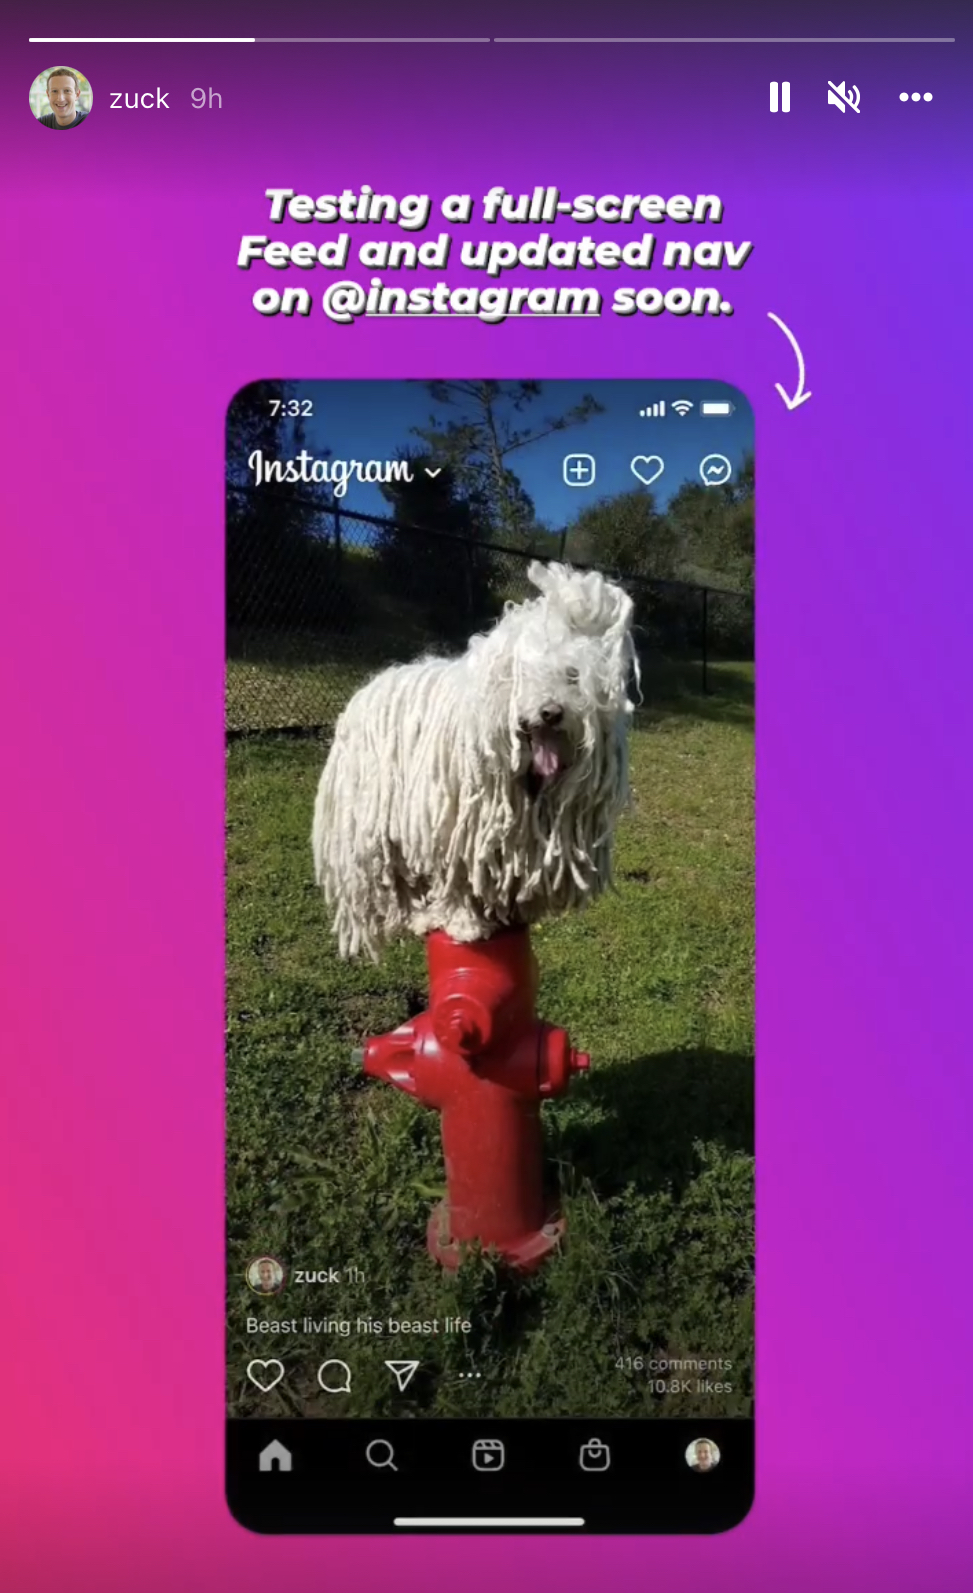 The main source of Instagram is moving in full screen